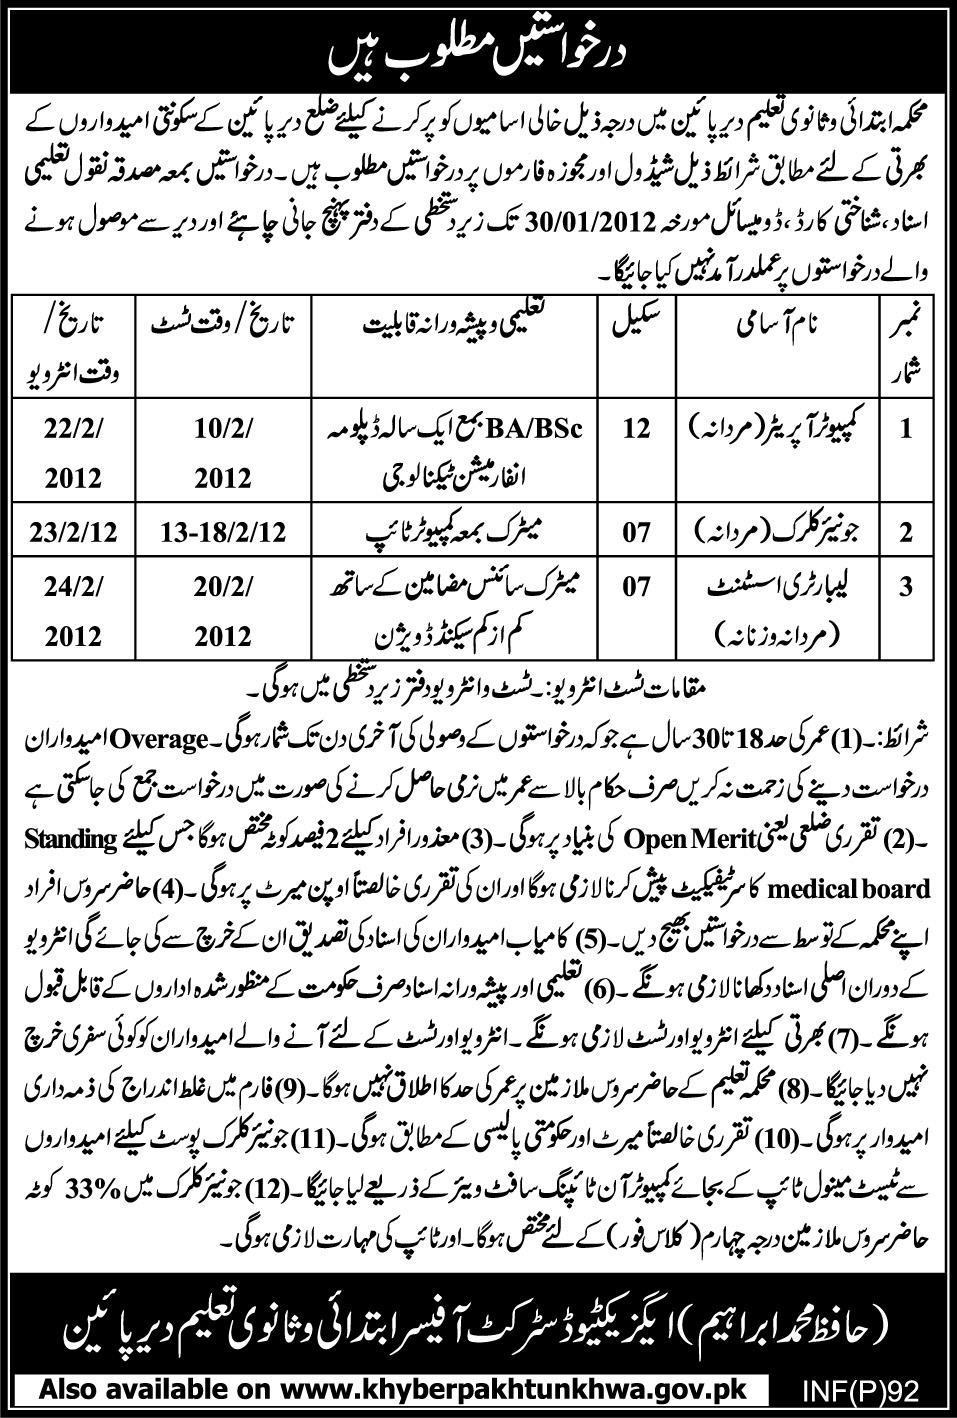 Department of Primary and Secondary Education Dir Jobs Opportunity